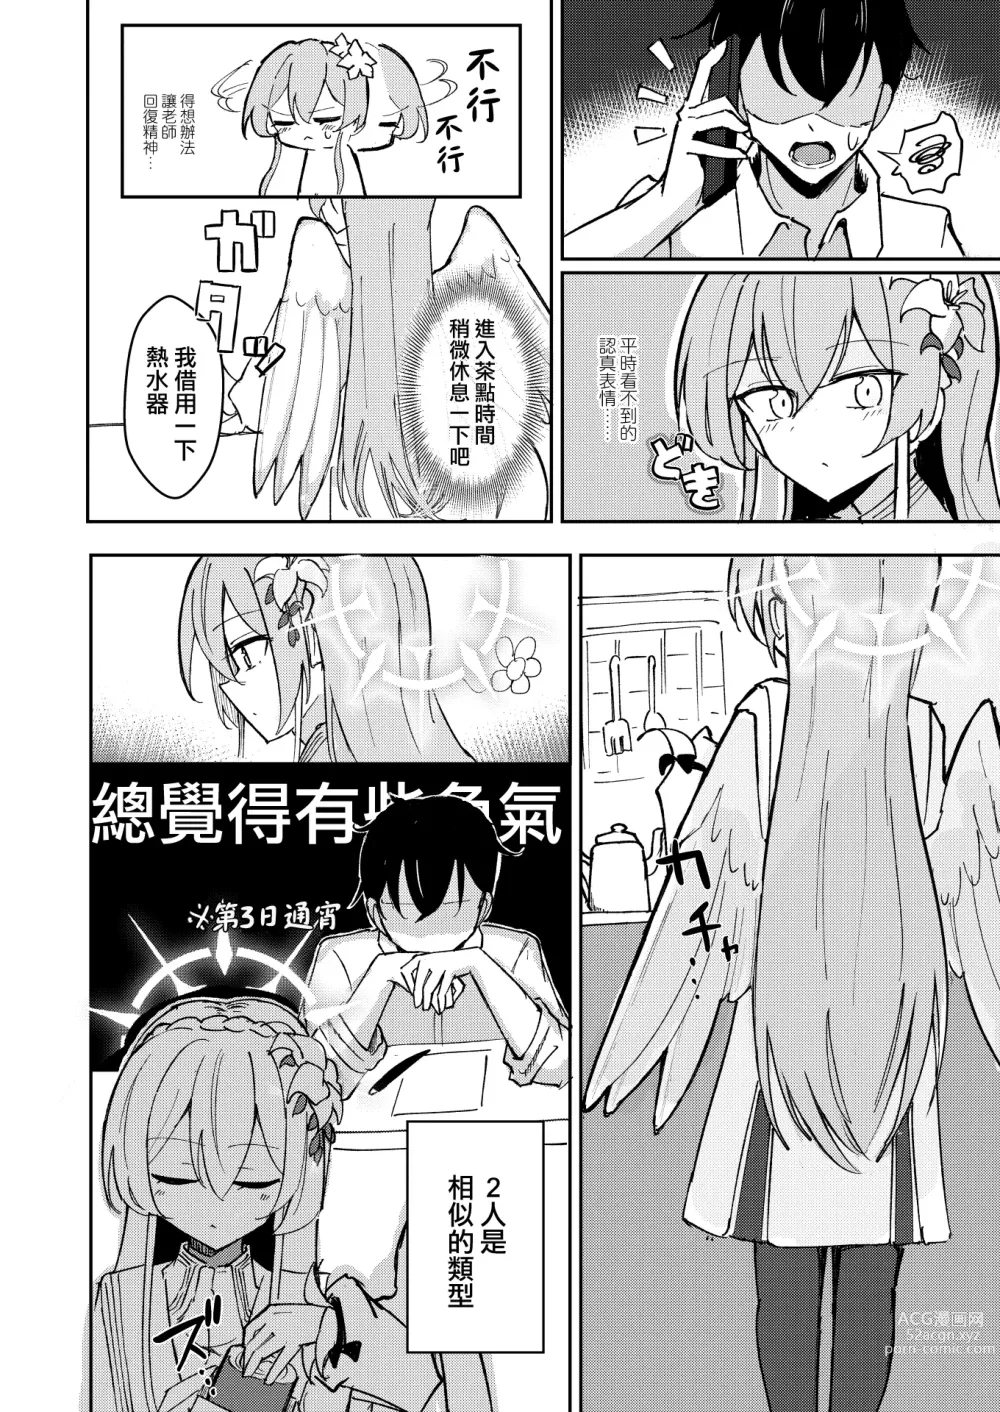 Page 5 of doujinshi 情欲羽翼下的學生會